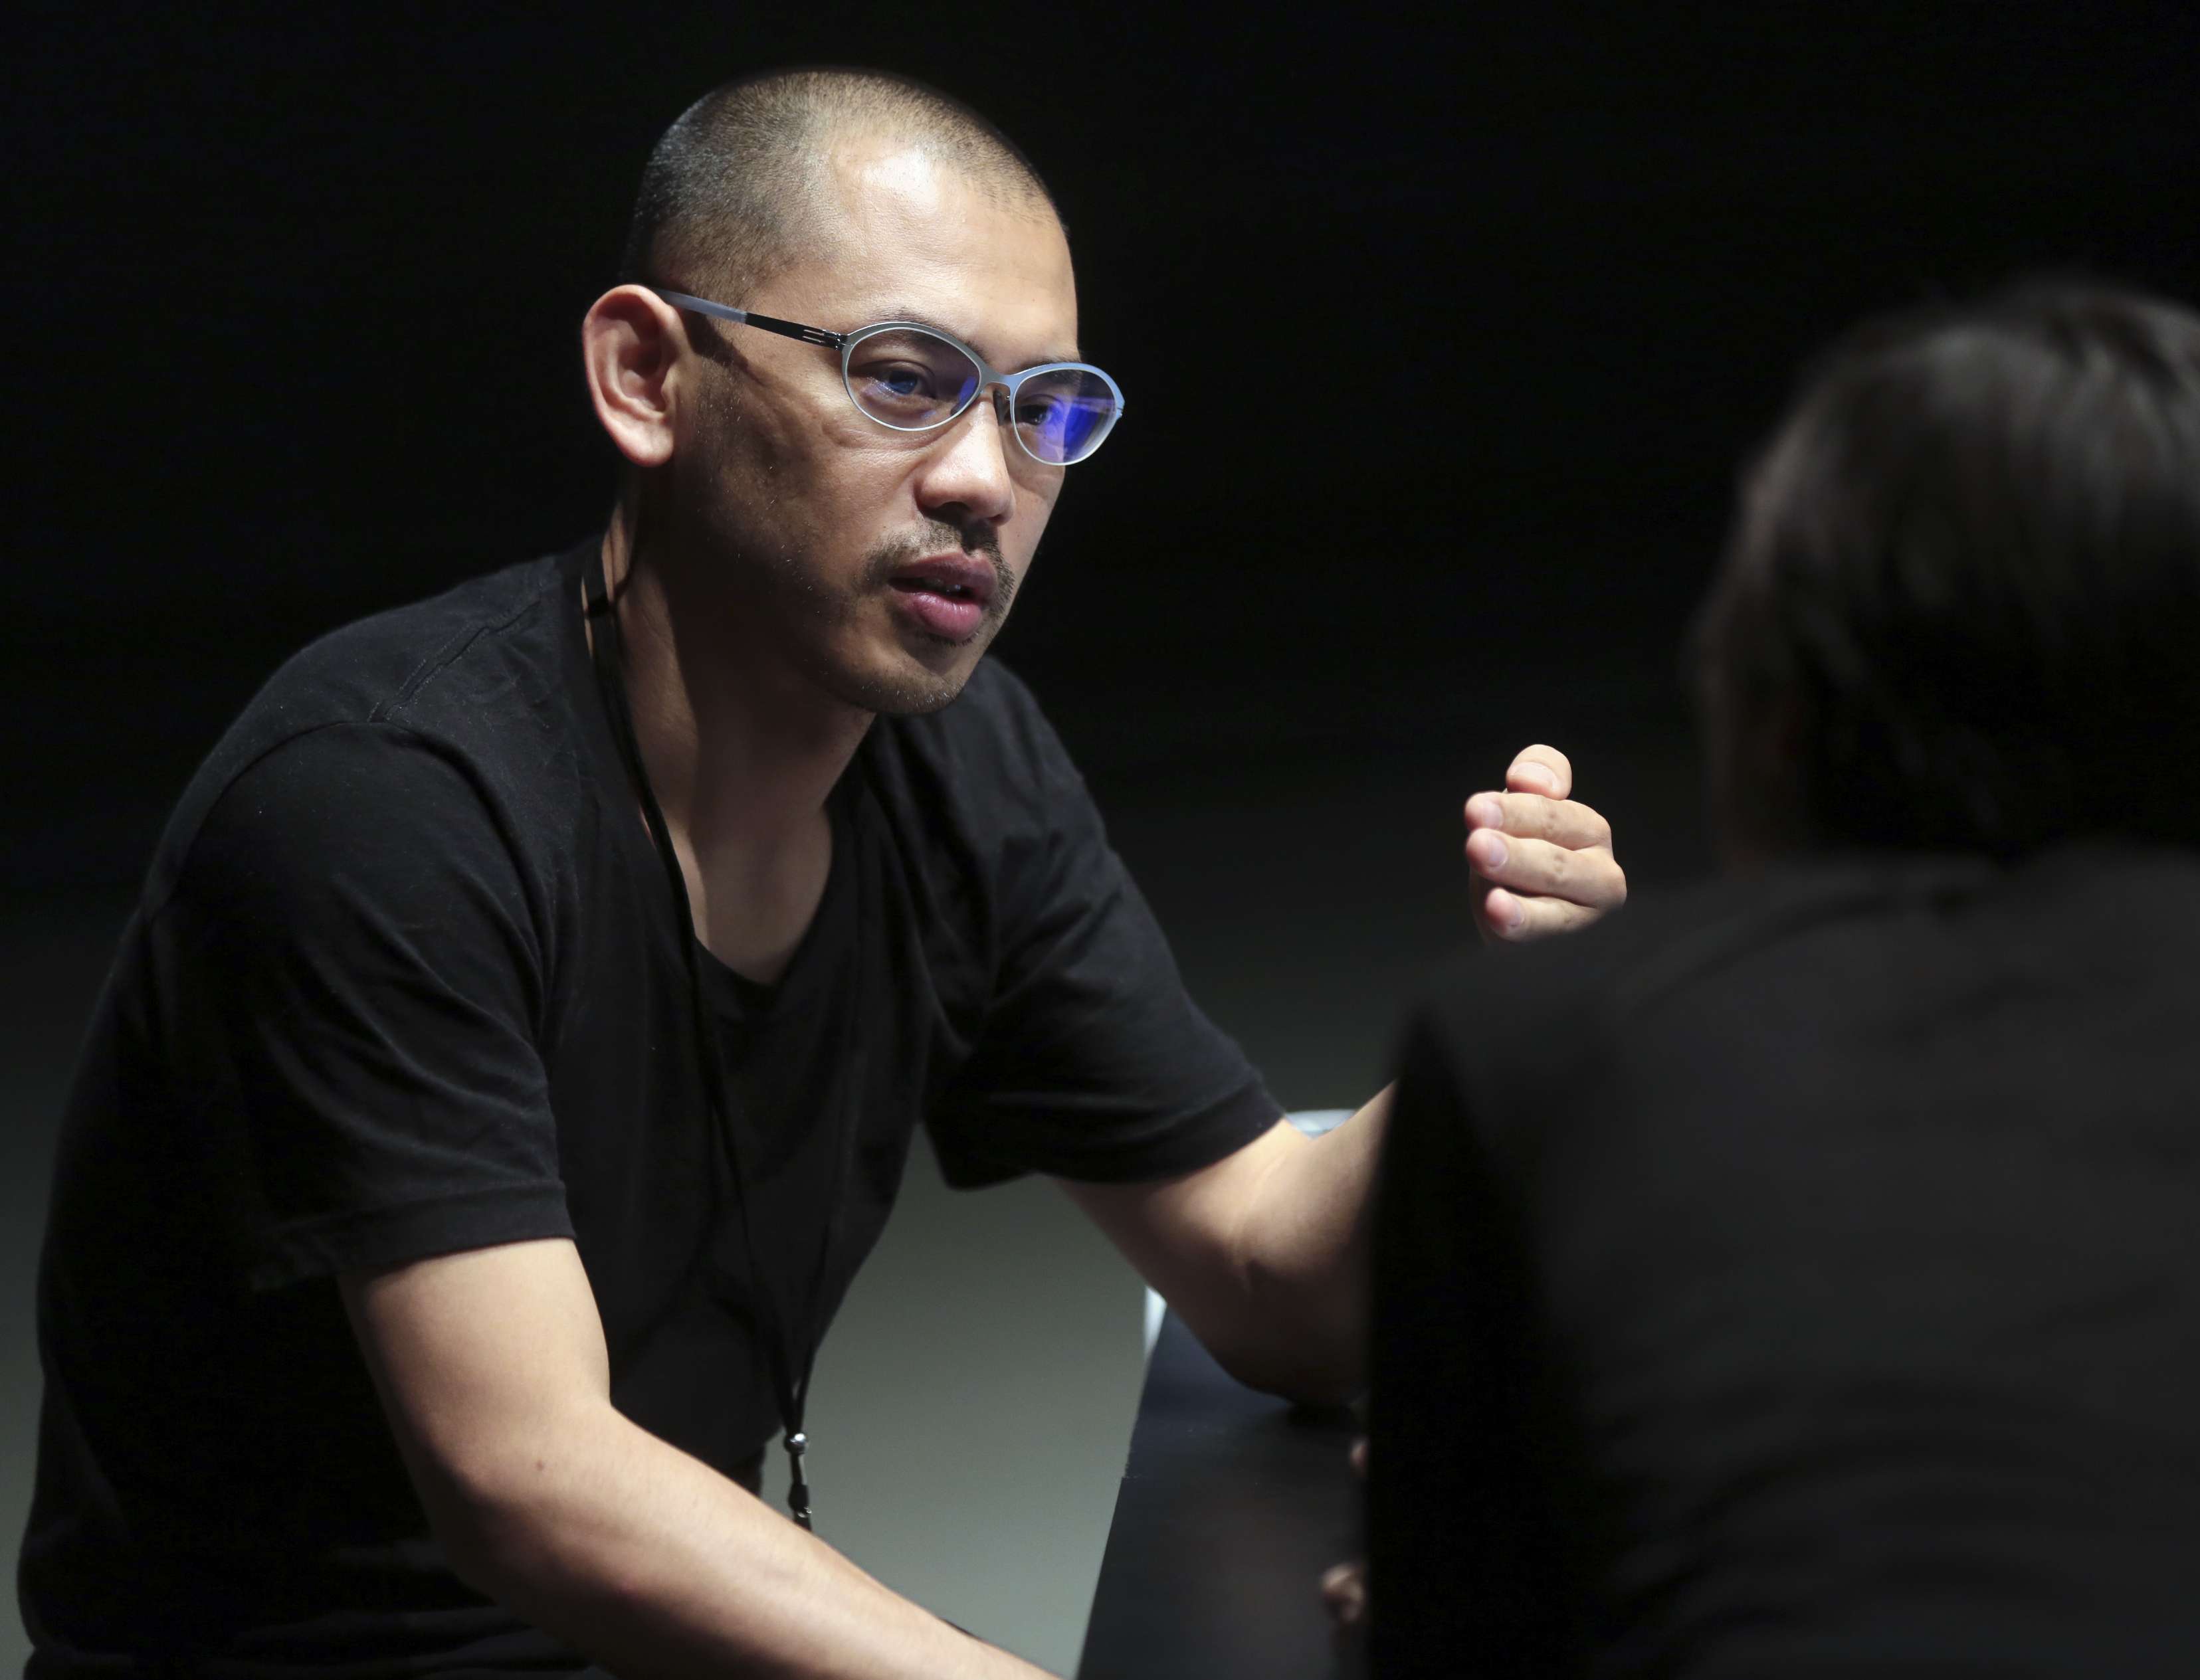 Multimedia artist, in Hong Kong for workshop with local performers, demonstrates how to add extra dimension to a show through technology such as a sensor to turn movement into images